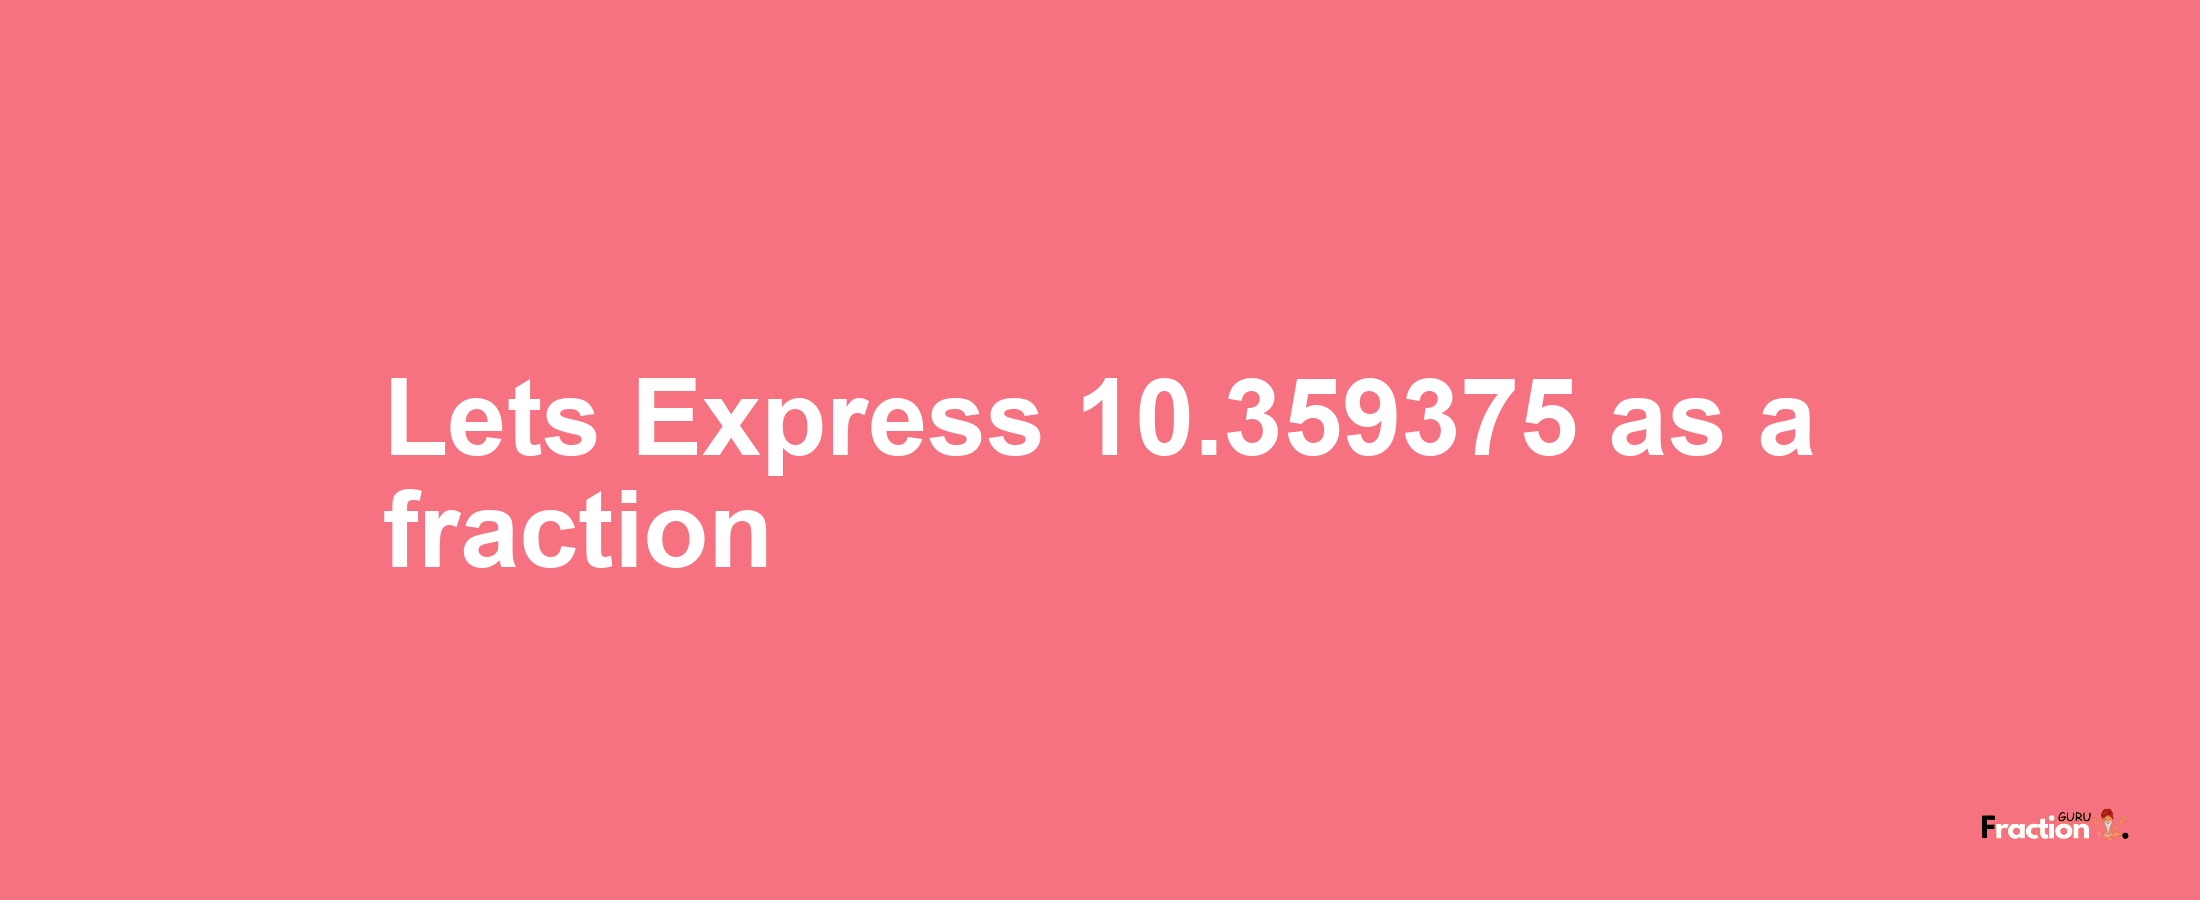 Lets Express 10.359375 as afraction